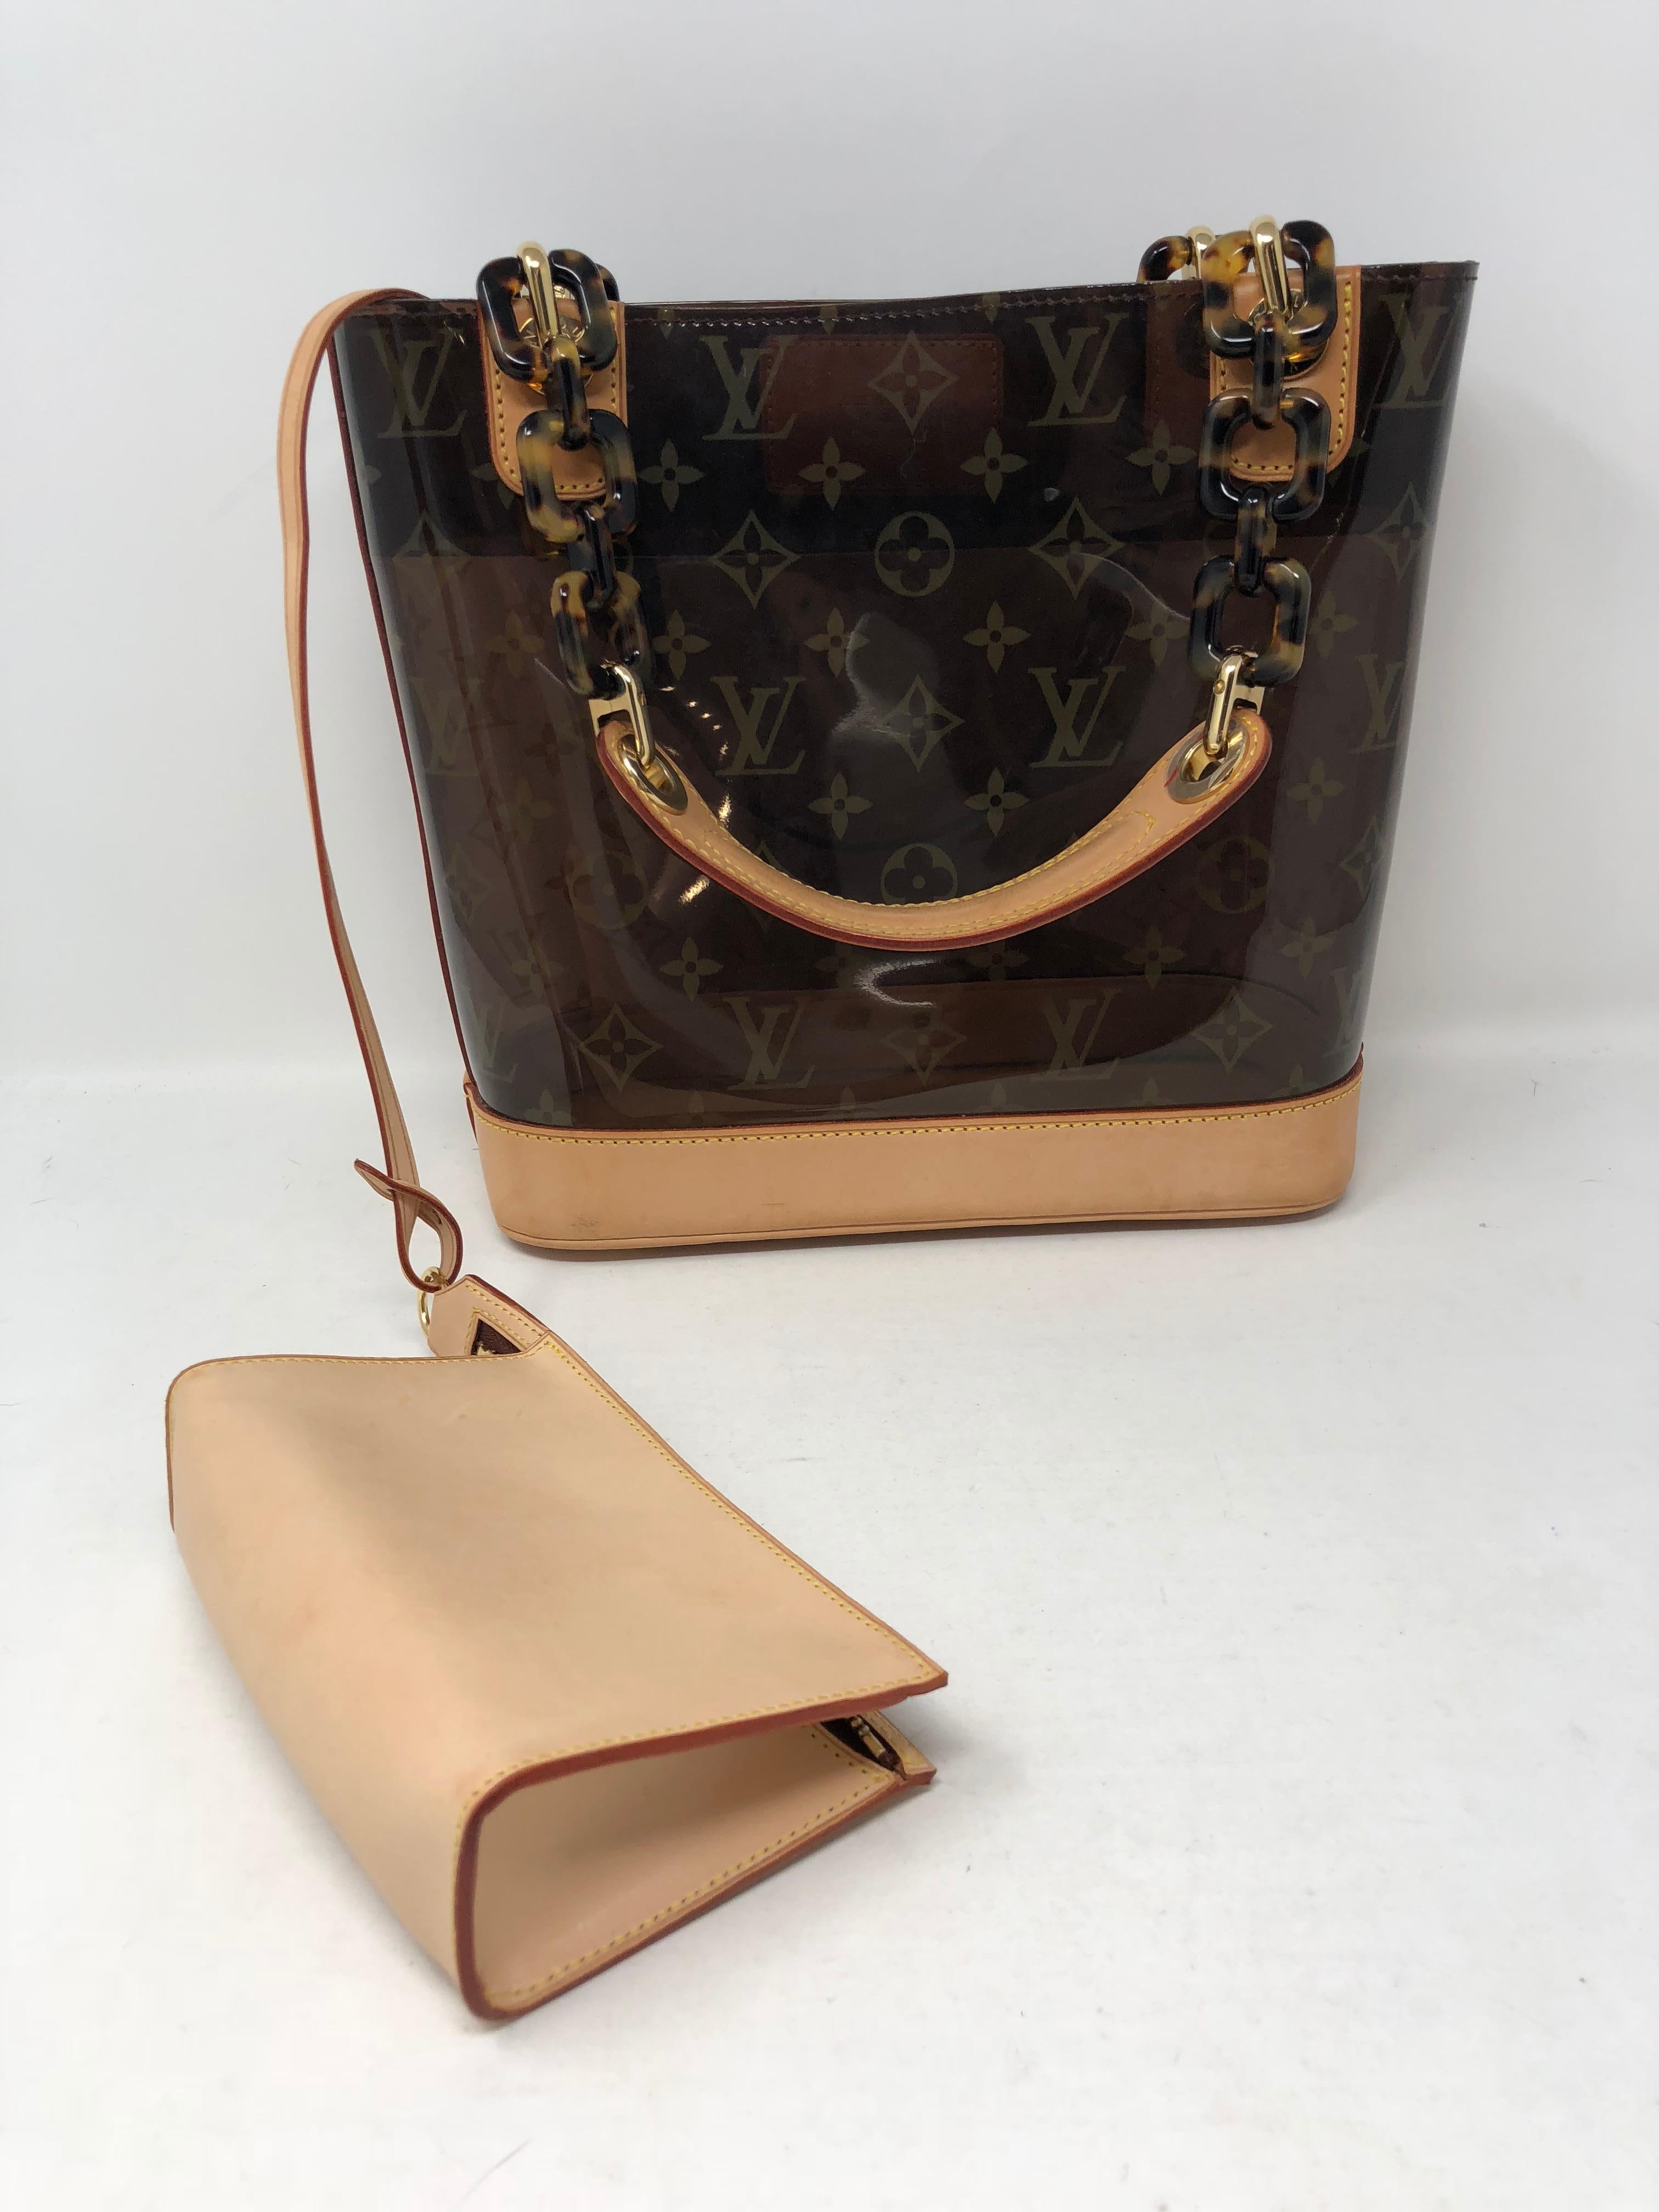 Louis Vuitton Cabas Ambre PM handbag with lucite tortoise chain and leather handles. The see through bag that allows you to see in the bag. A vintage Collector's piece by LV in good condition. Vachetta leather is still light. The 